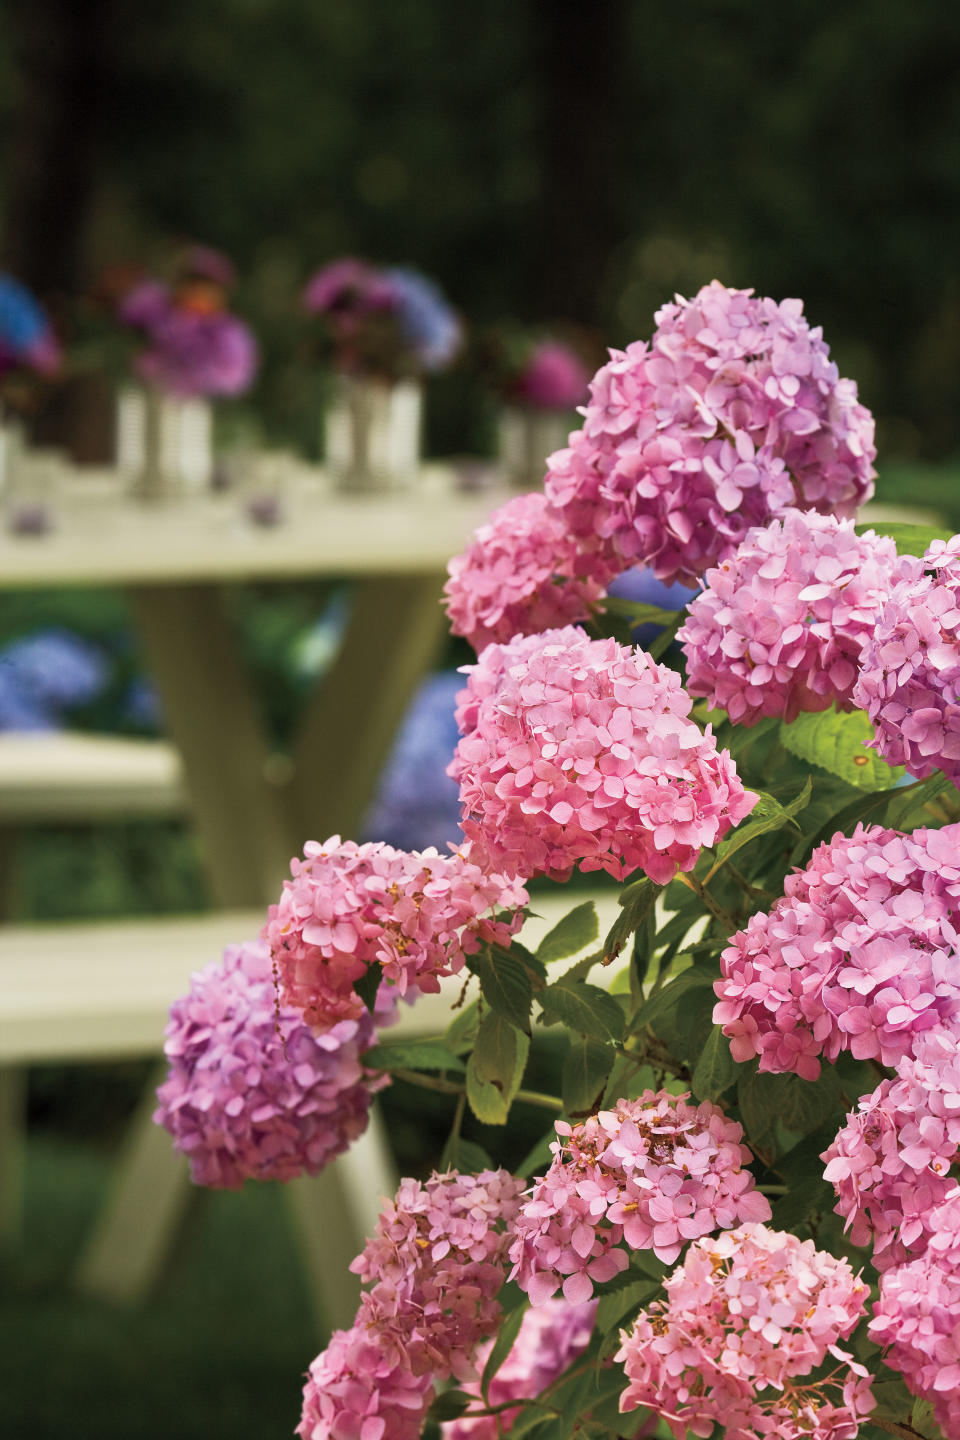 4. How can I change a hydrangea’s color?